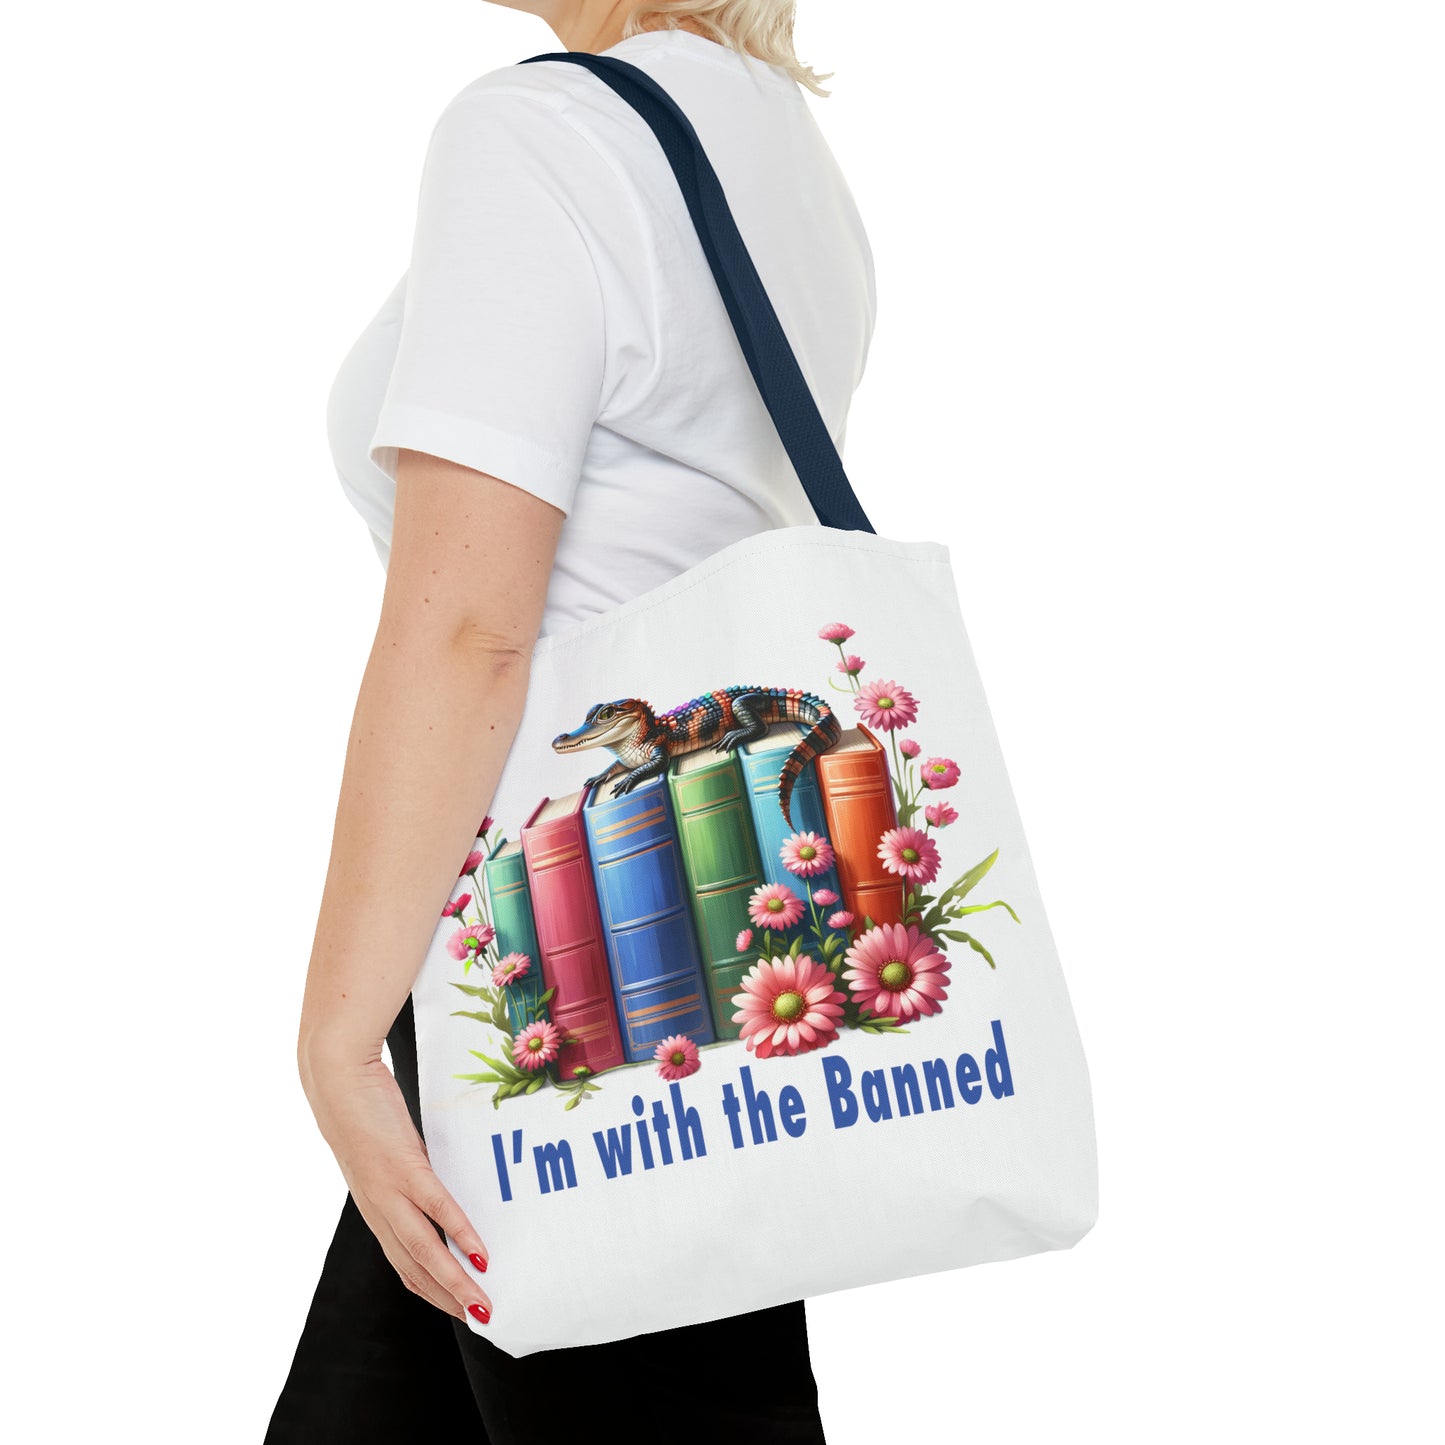 I'm with the Banned Tote